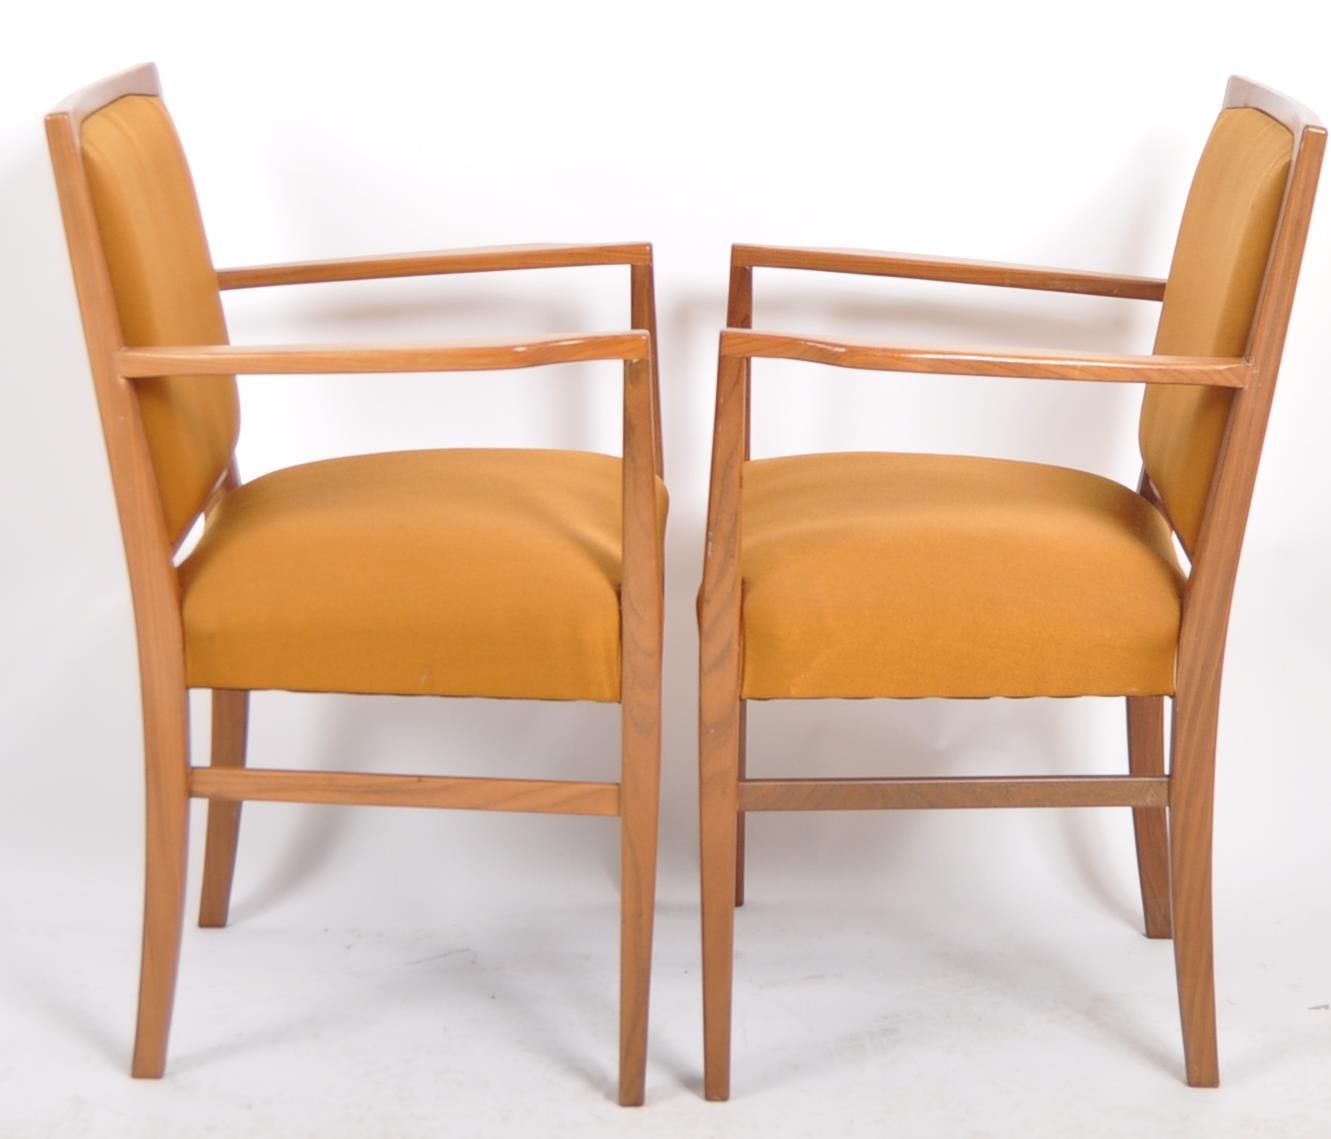 GORDON RUSSELL - MATCHING SET OF 16 TEAK FRAMED CHAIRS - Image 11 of 13